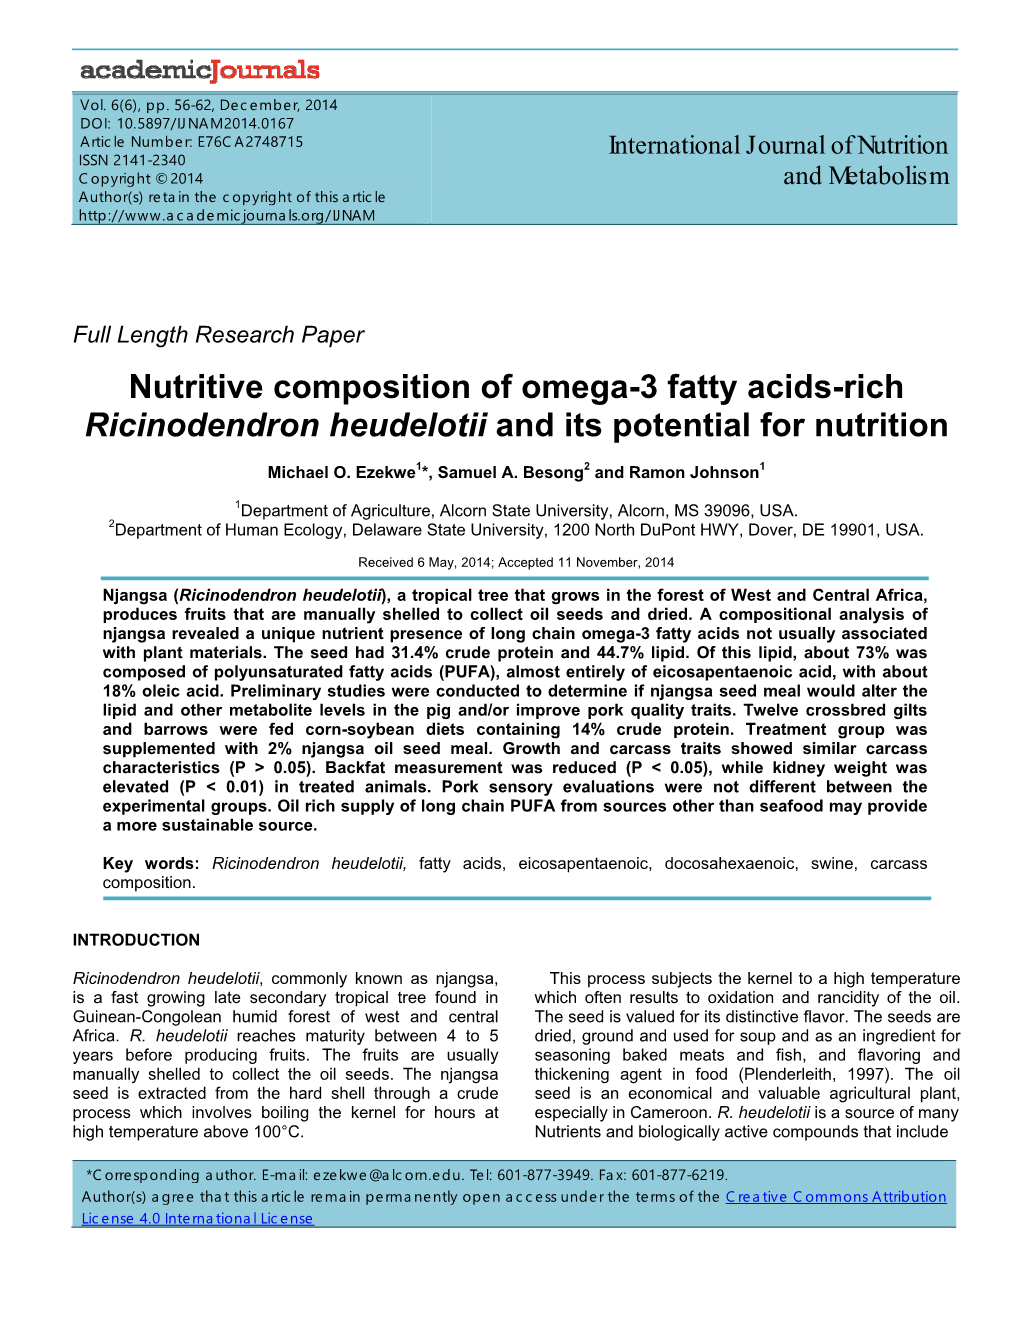 Nutritive Composition of Omega-3 Fatty Acids-Rich Ricinodendron Heudelotii and Its Potential for Nutrition